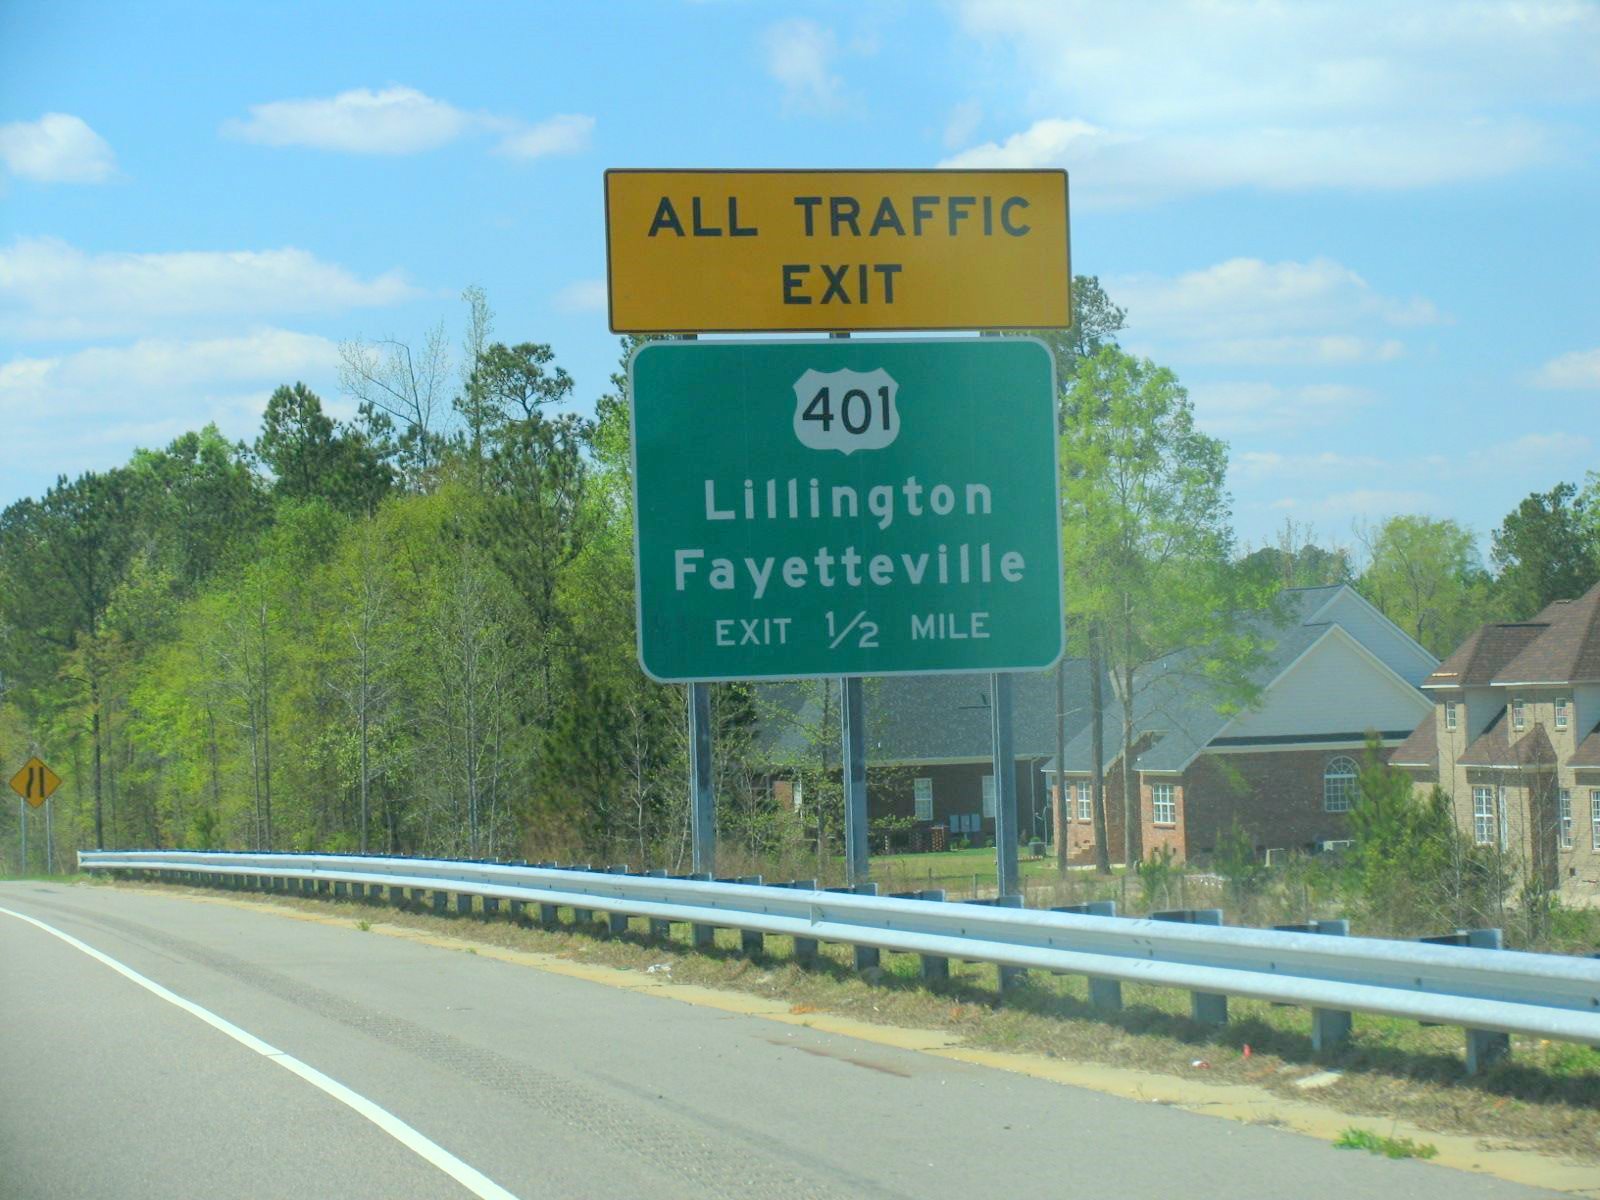 I-295 Fayetteville Outer Loop, US 401 exit signage, image by Adam Prince.